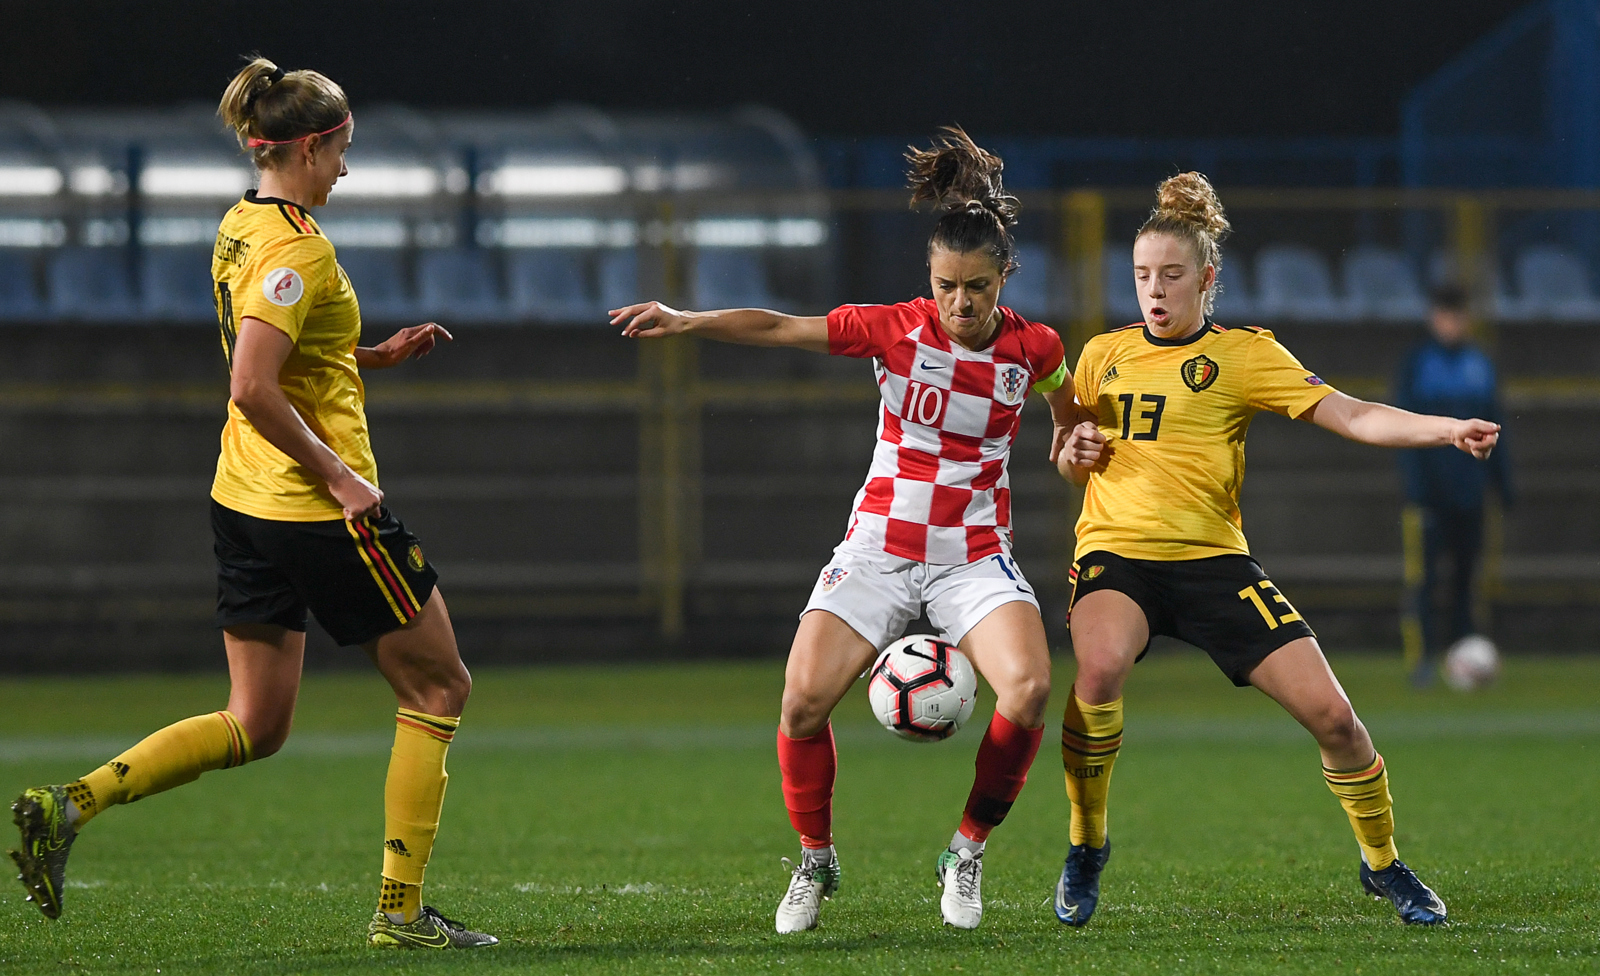 Belgium's Justine Vanhaevermaet, Croatia's Iva Landeka and Belgium's Elena Dhont pictured in action during a soccer game between Croatia and Belgium's Red Flames, Friday 08 November 2019 in Zapresic, Croatia, the third out of 8 qualification games for the women's Euro 2021 European Championships.